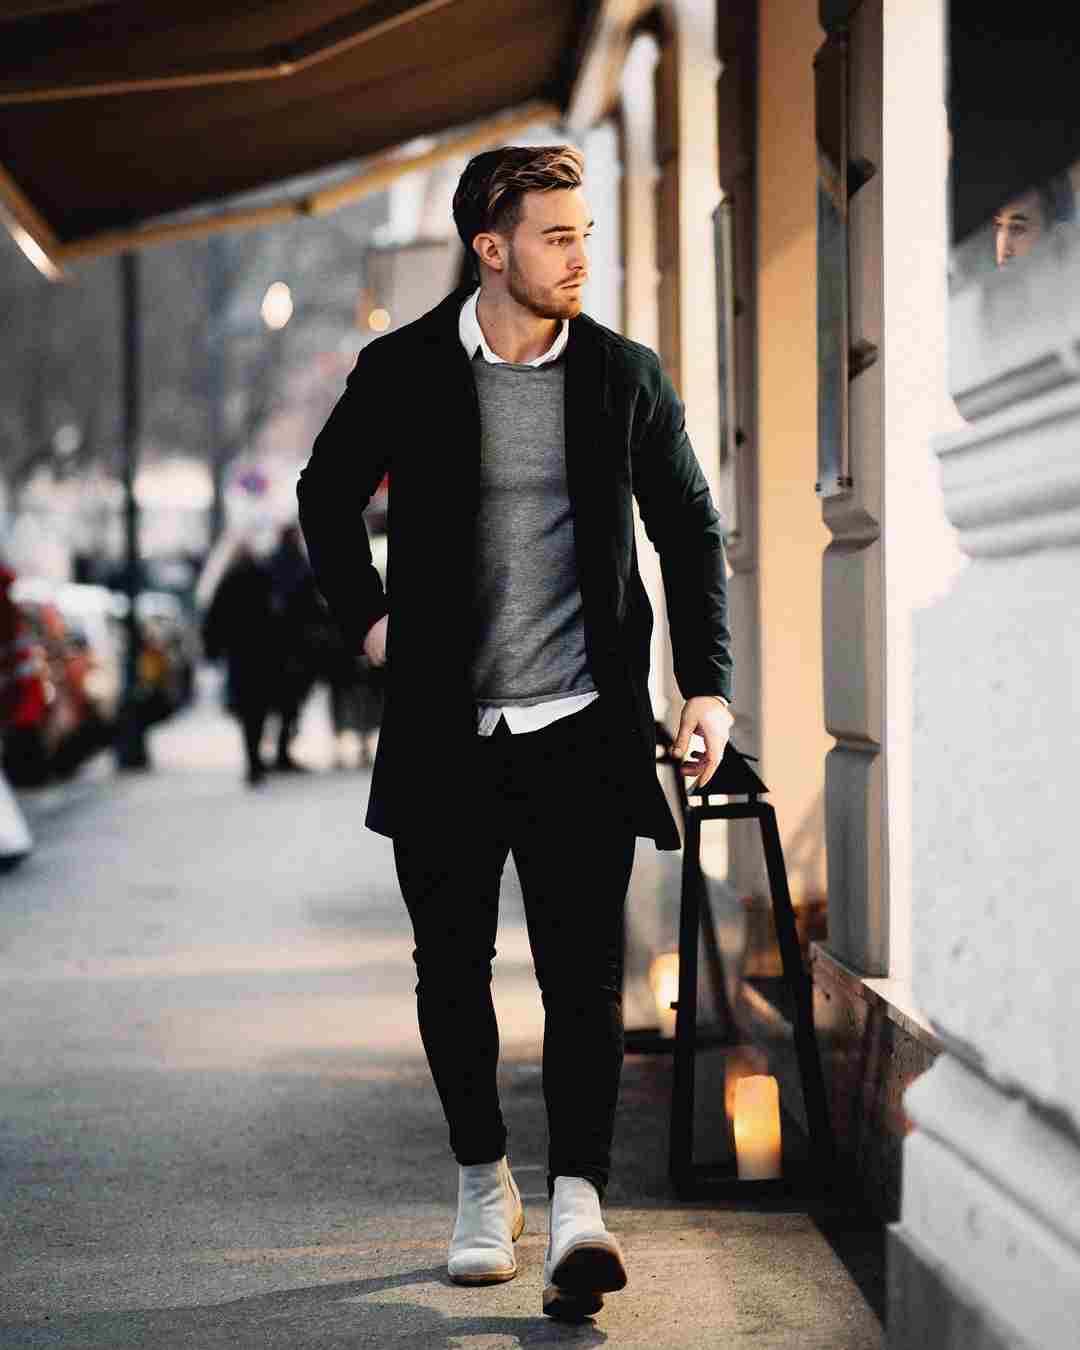 32 super skinny jeans outfit ideas for confident guys. - vogueymen.com